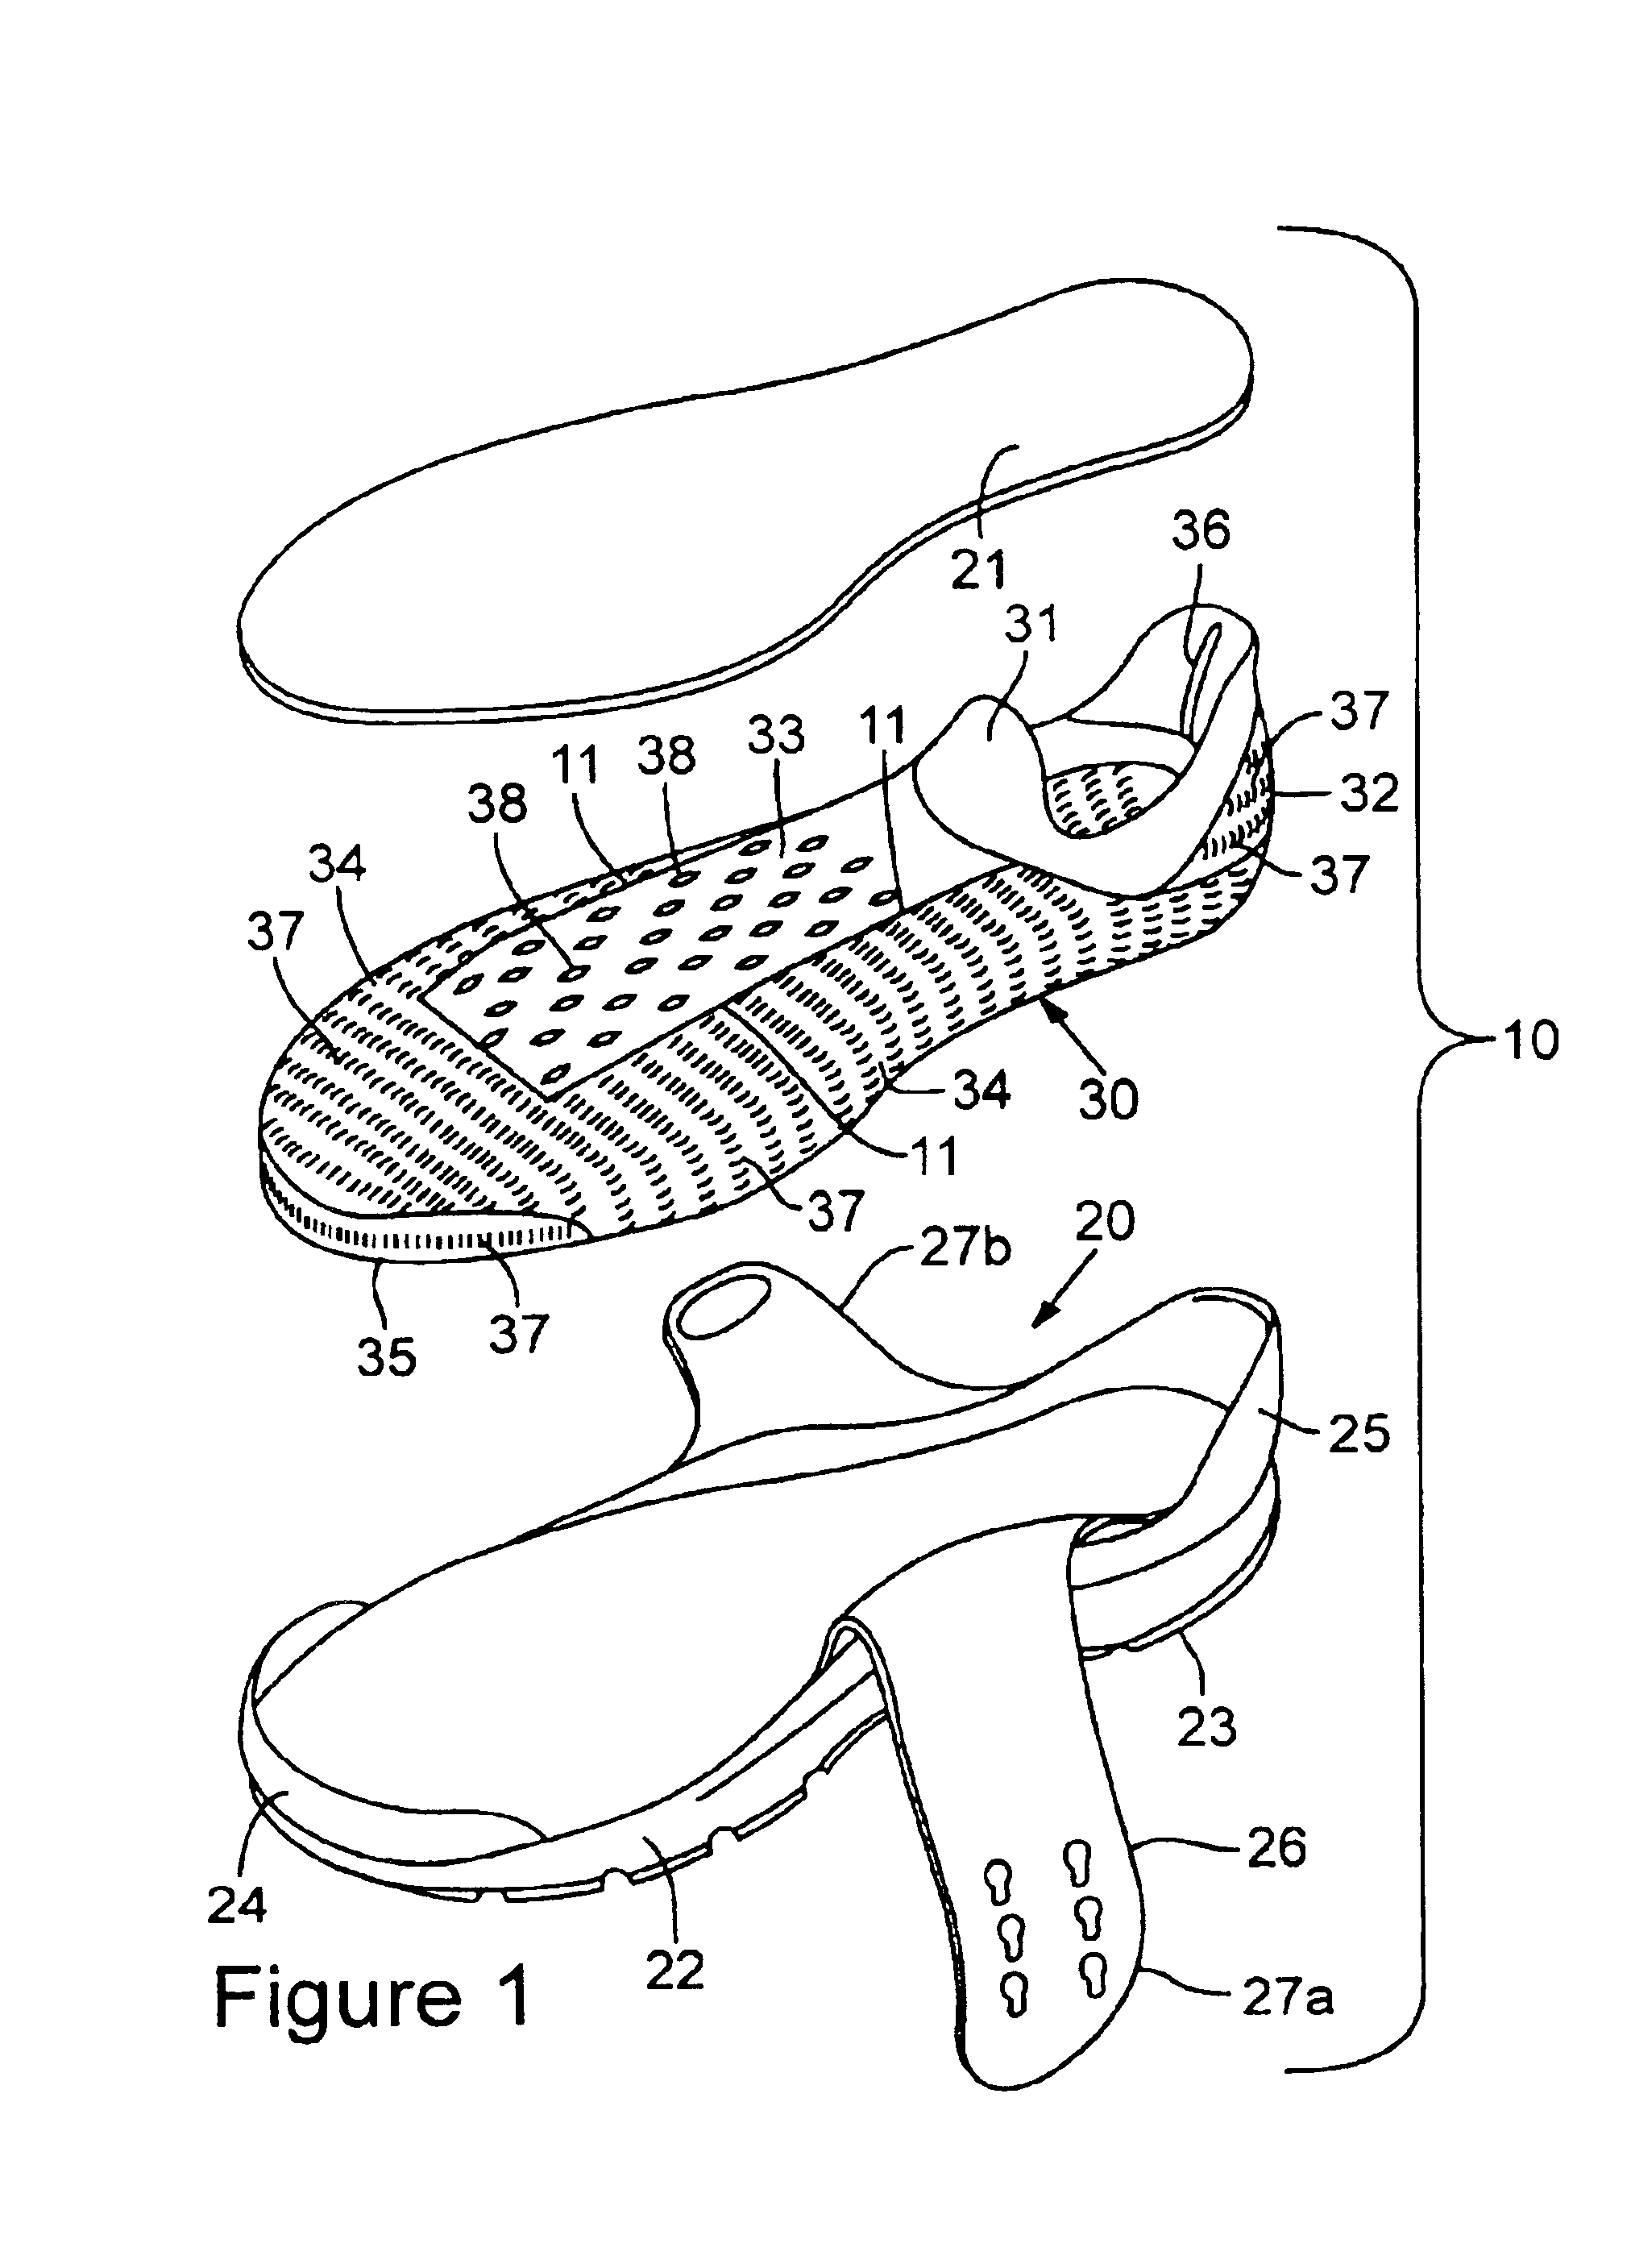 Footwear with knit upper and method of manufacturing the footwear